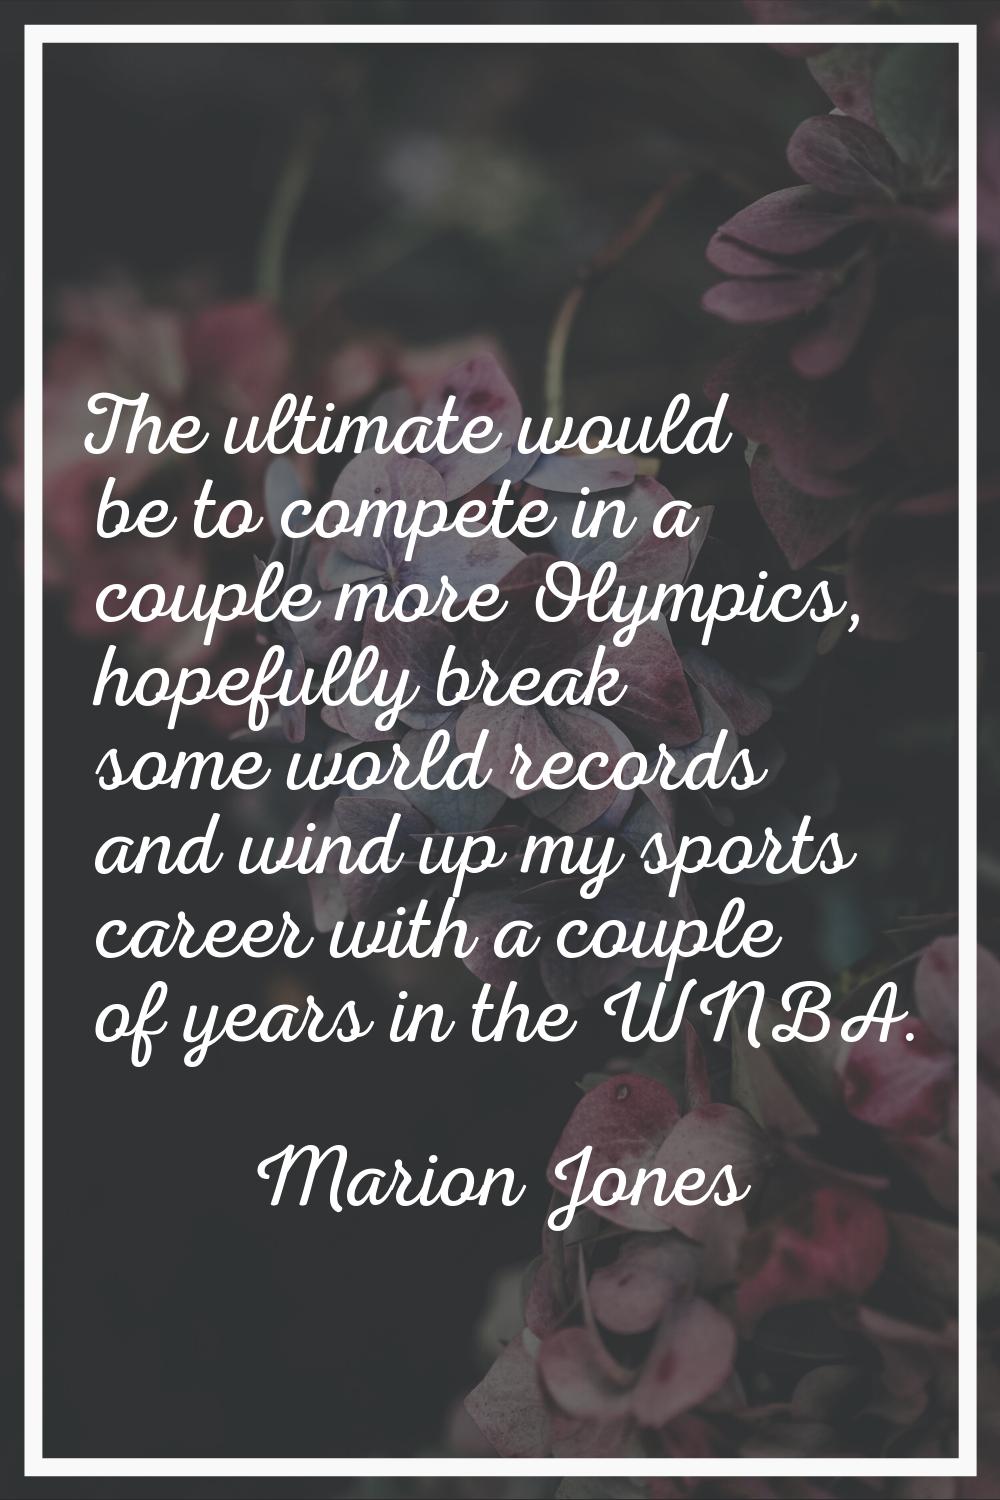 The ultimate would be to compete in a couple more Olympics, hopefully break some world records and 